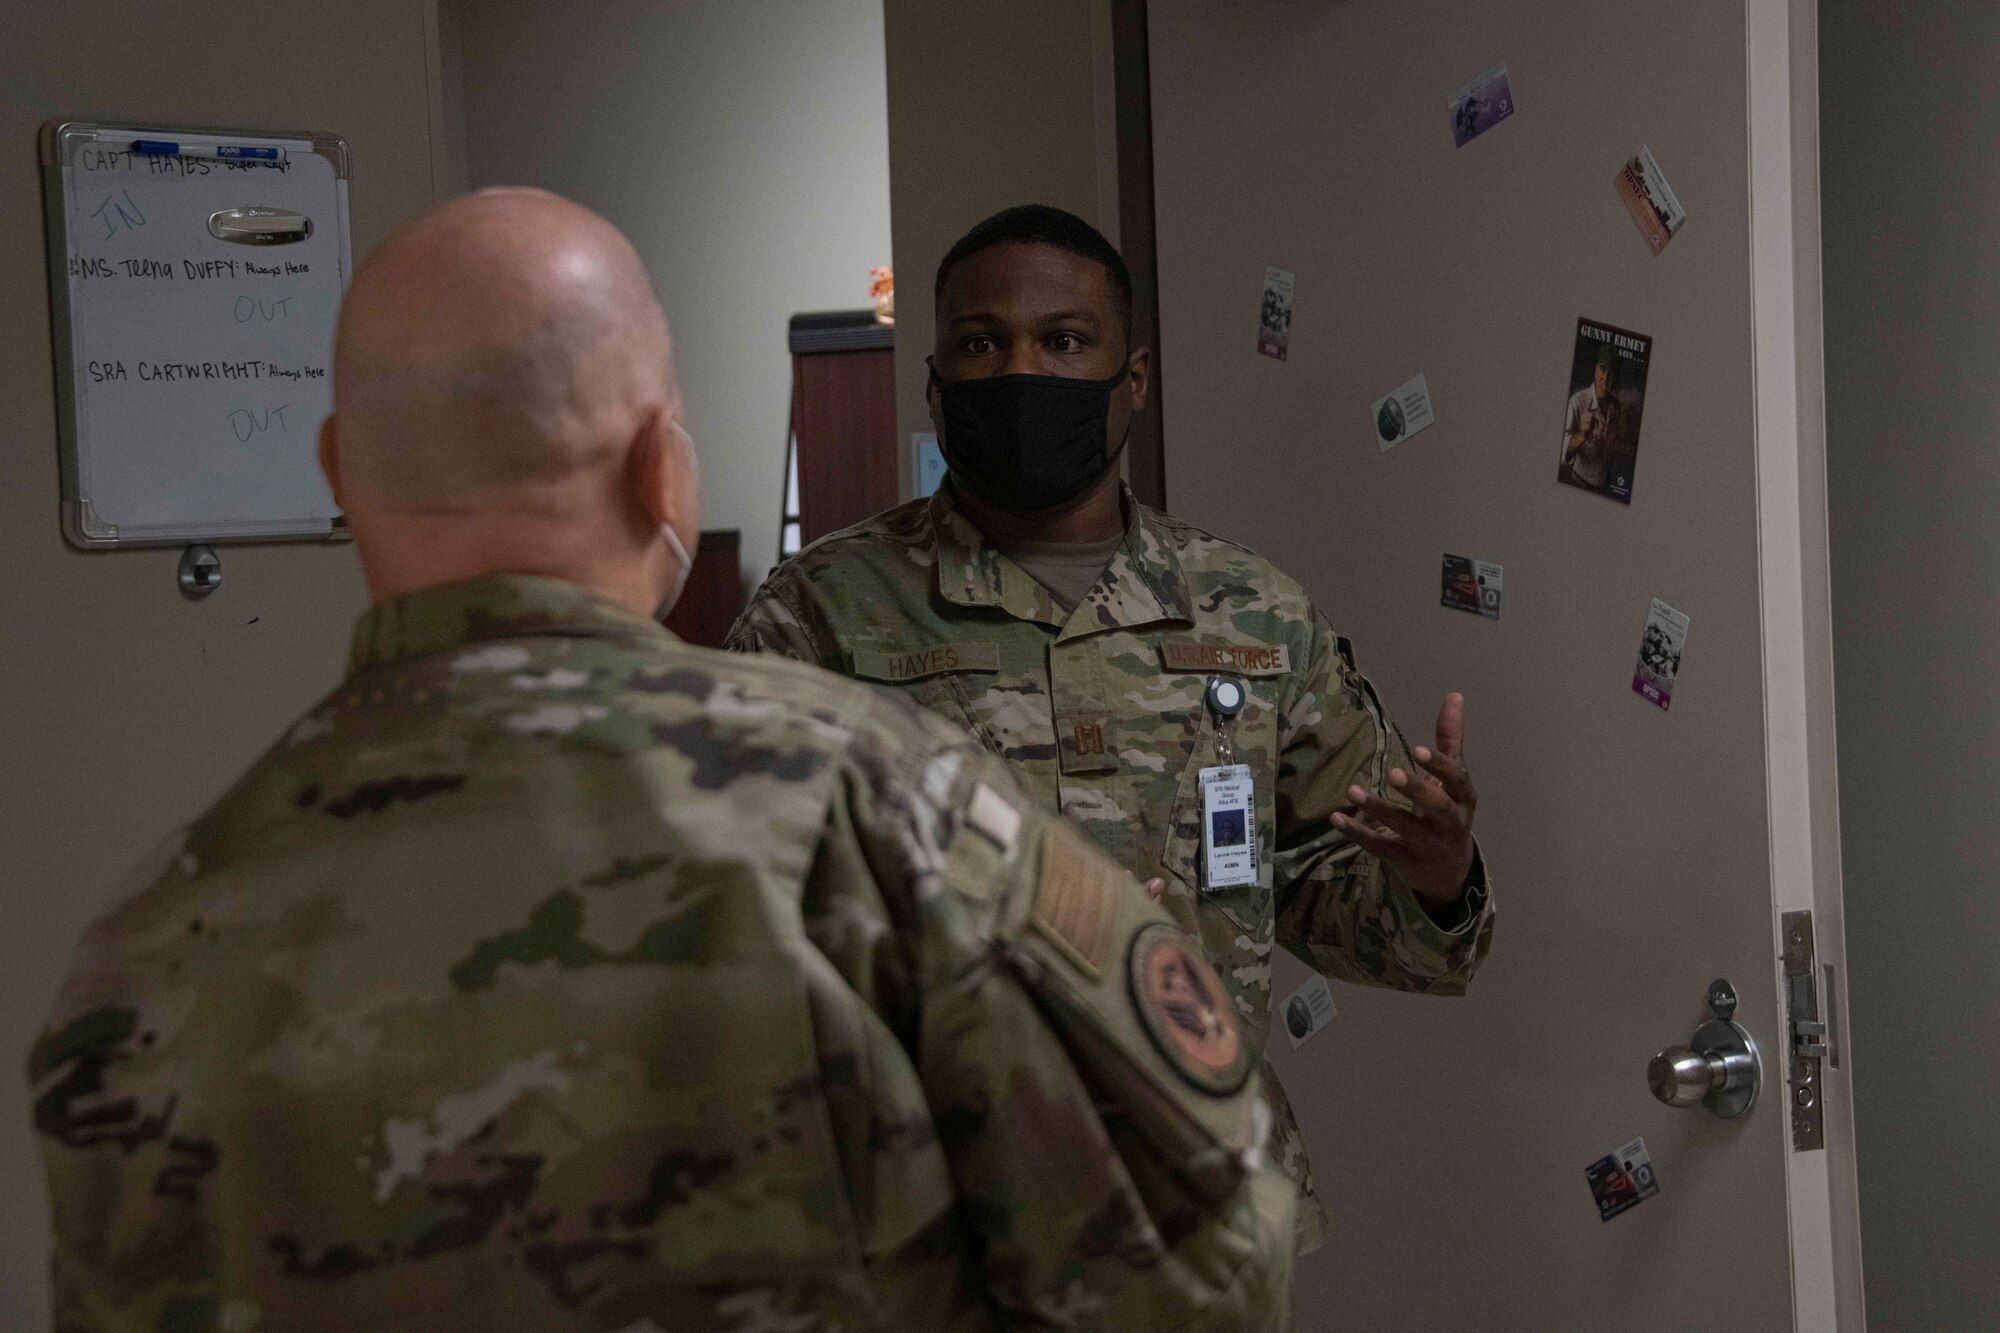 A military medical member talks to another military member